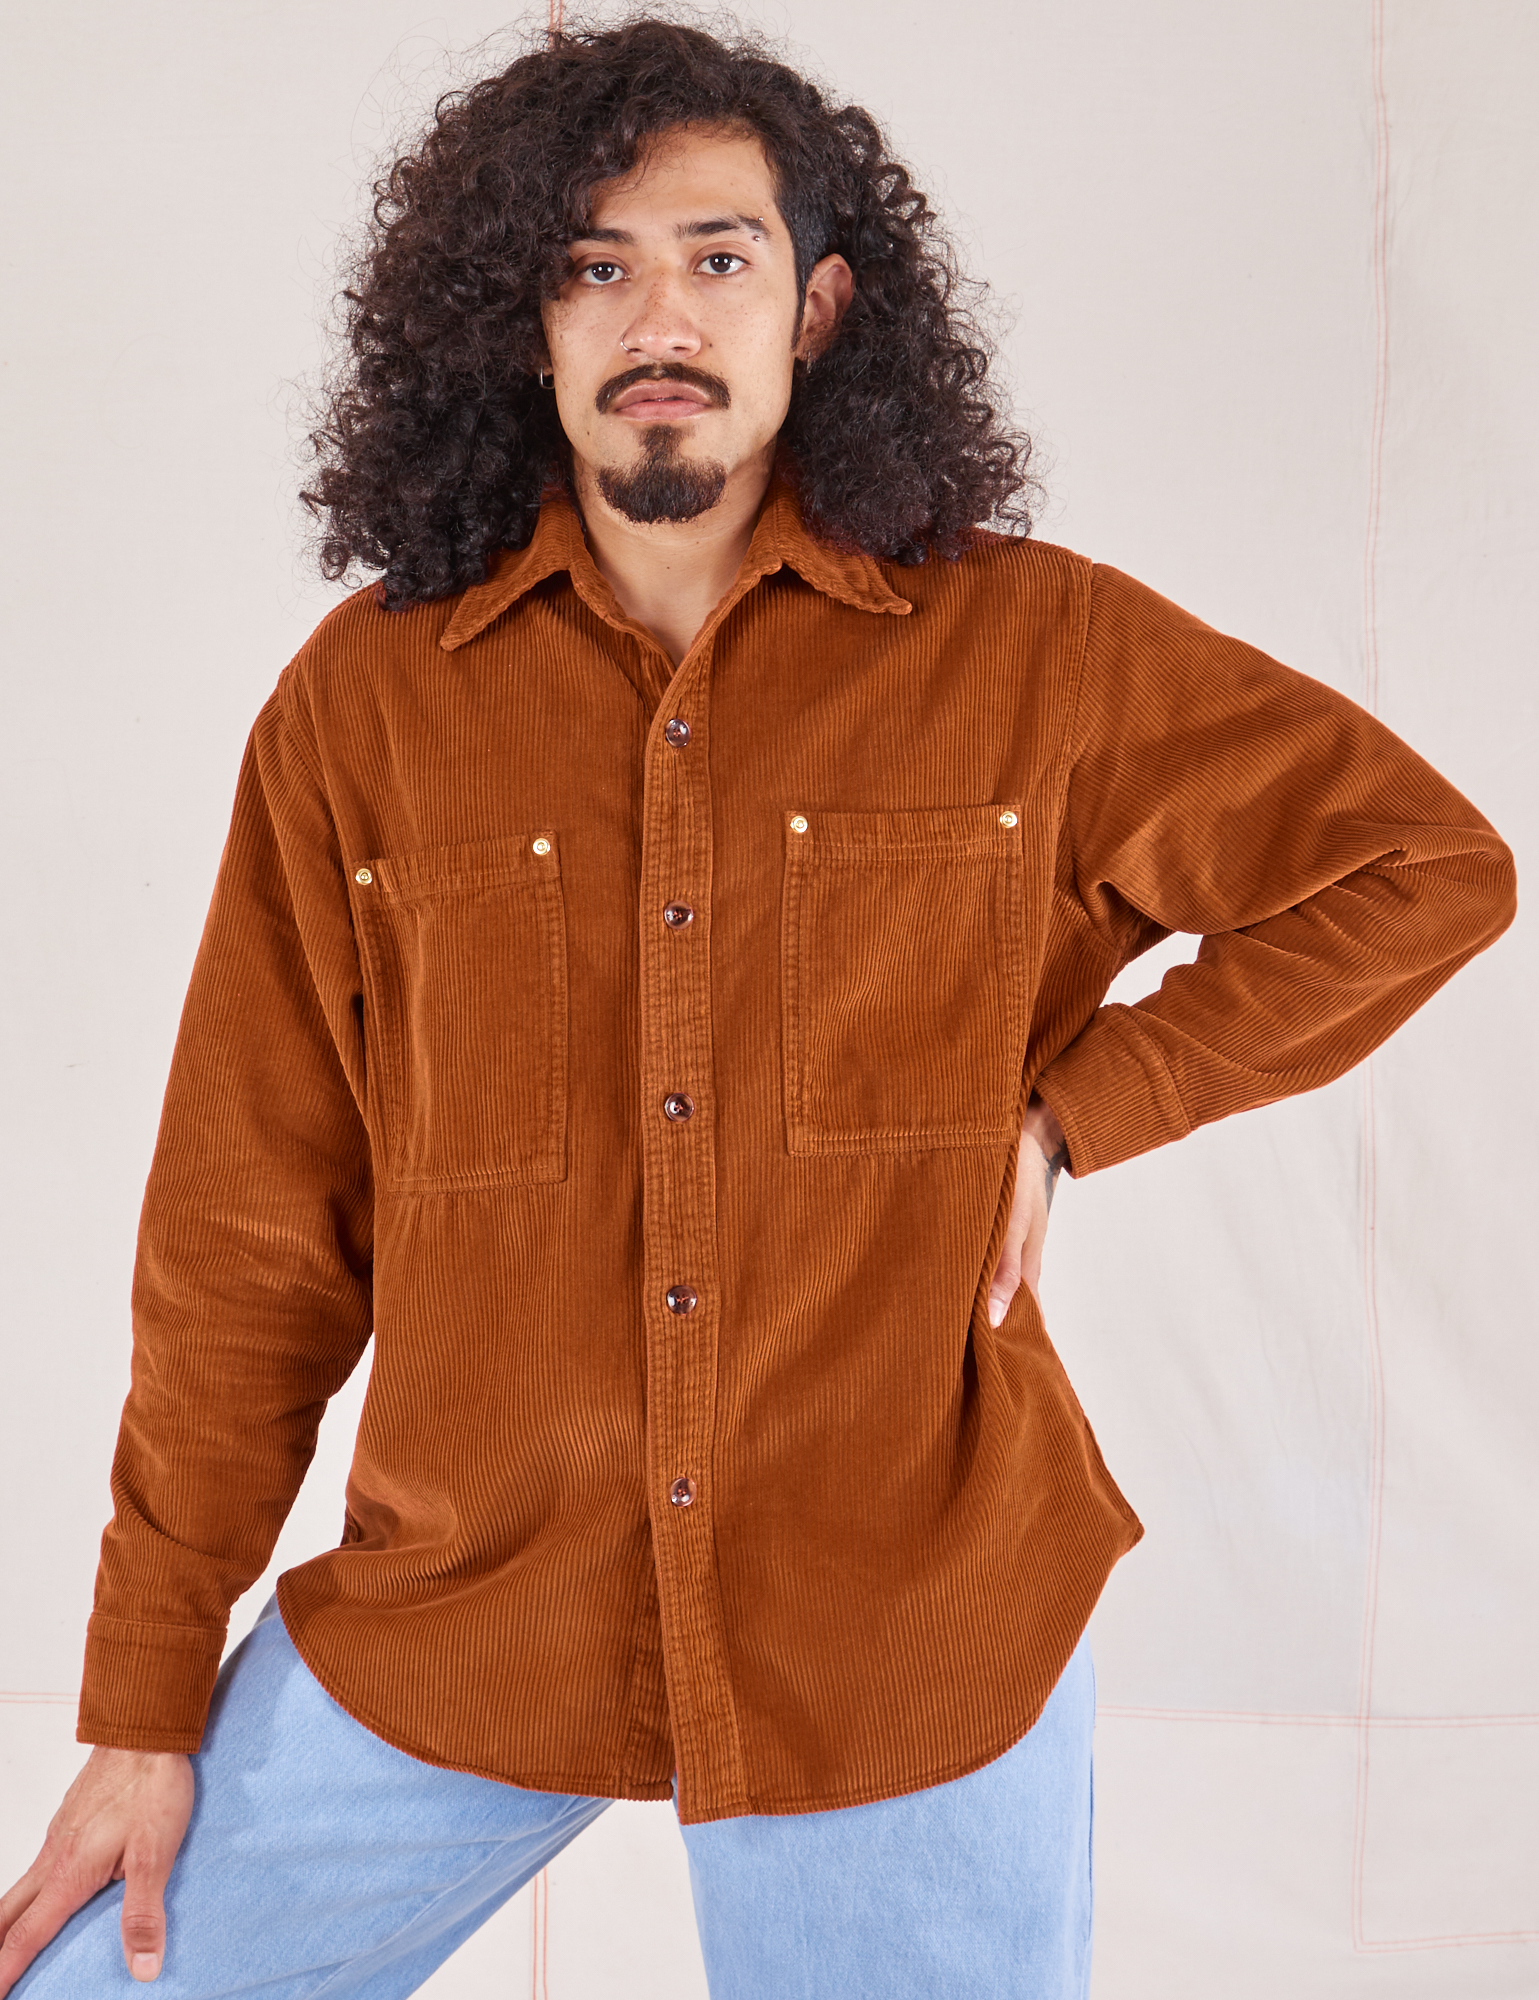 Jesse is wearing a buttoned up Corduroy Overshirt in Burnt Terracotta